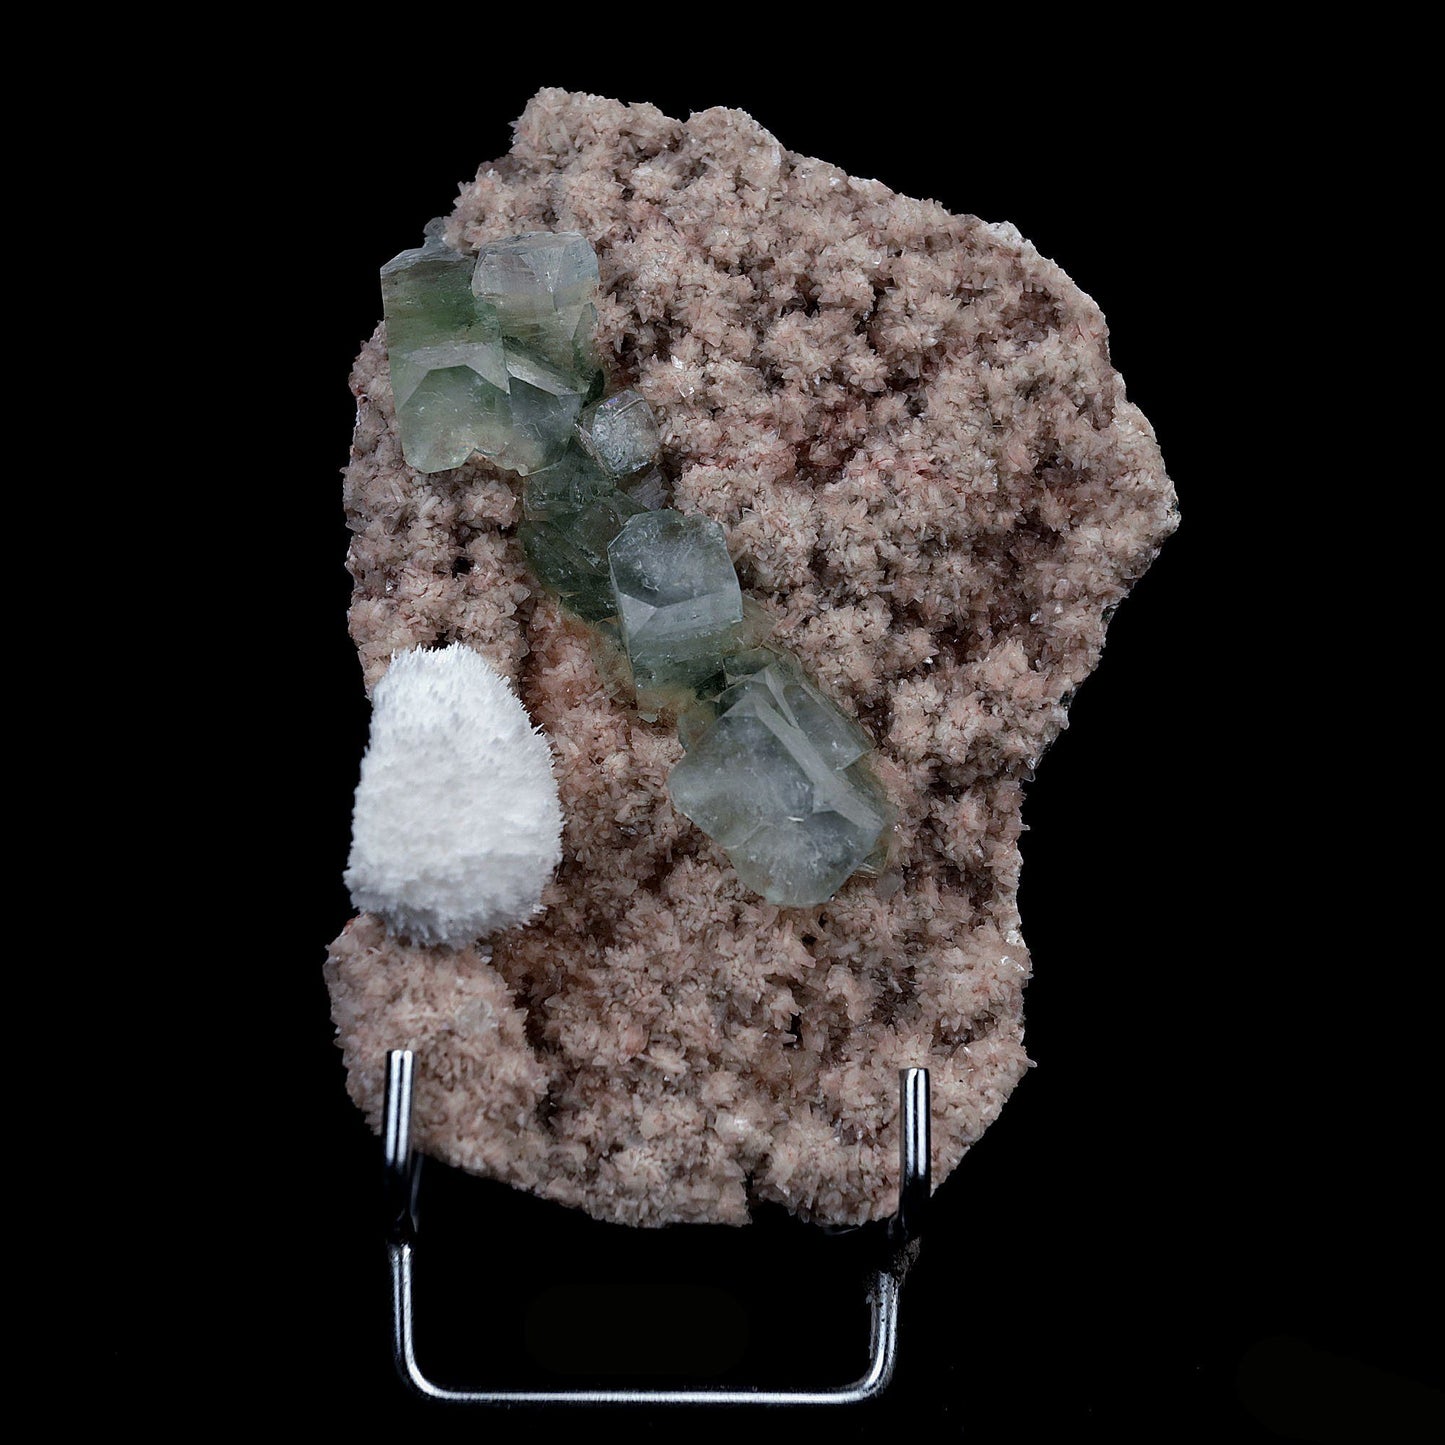 Green Apophyllite with Mordenite on Heulandite Natural Mineral Specime…  https://www.superbminerals.us/products/green-apophyllite-with-mordenite-on-heulandite-natural-mineral-specimen-b-4097  Features:An extremely stylish piece highlighting a lattice thickly covered with scaled-down, beige heulandite precious crystals several shiny, bigger light-beige Heulandite crystals on the framework